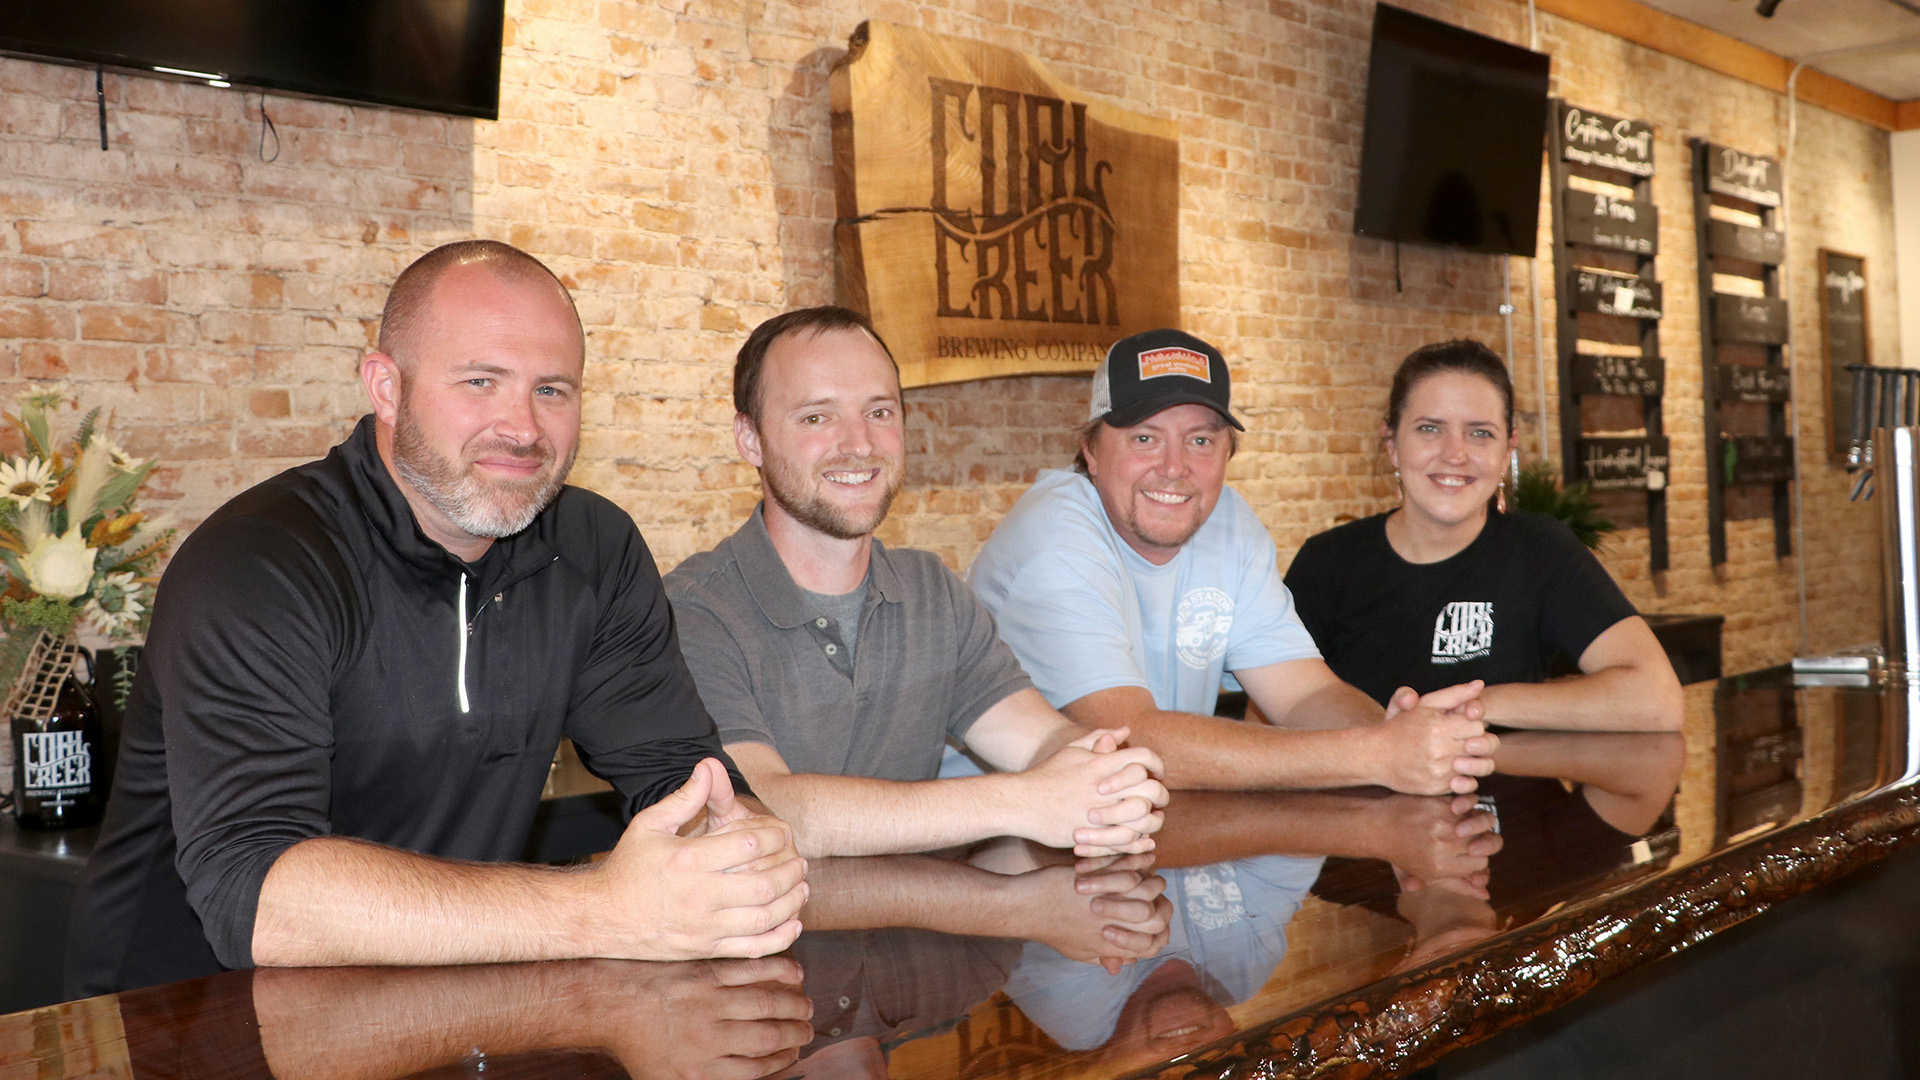 All four owners of the Coal Creek Brewing Company — Mike Grieve, Trevin Kenedy, Justin Stange and Danielle Bender — have ties to farming